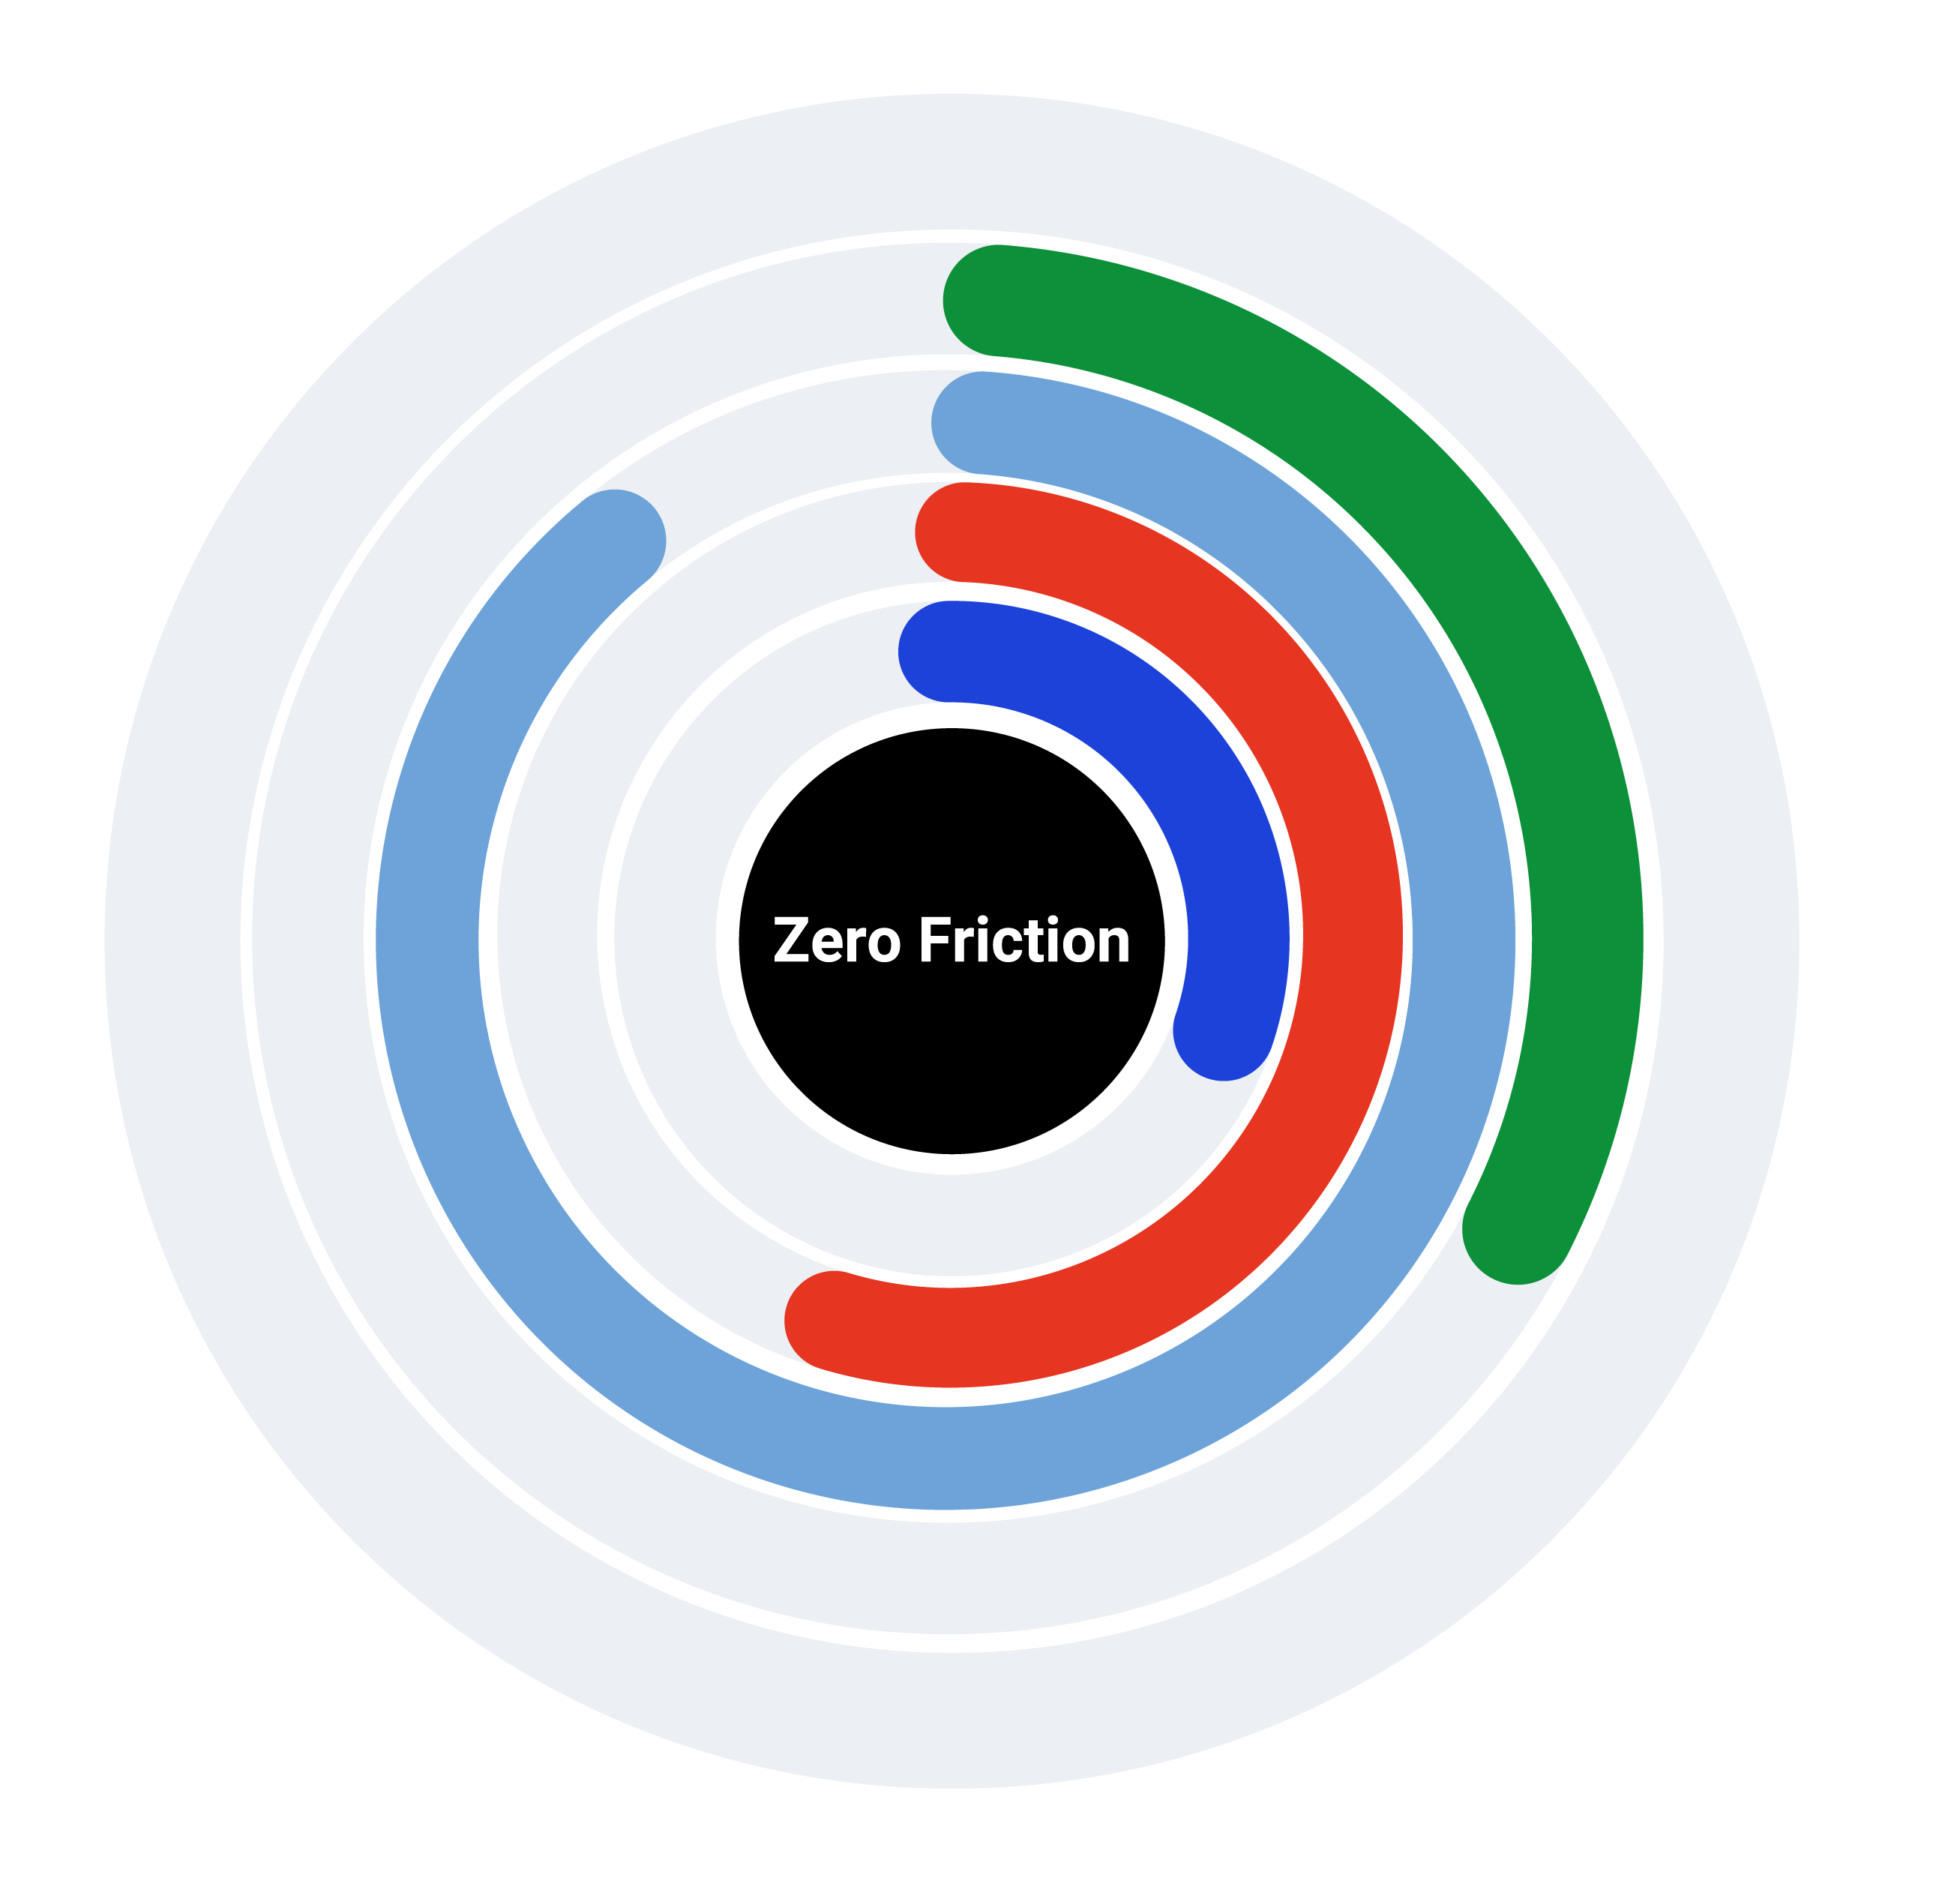 Zero friction gauge. This is a pie chart showing different successful areas within a contact centre.